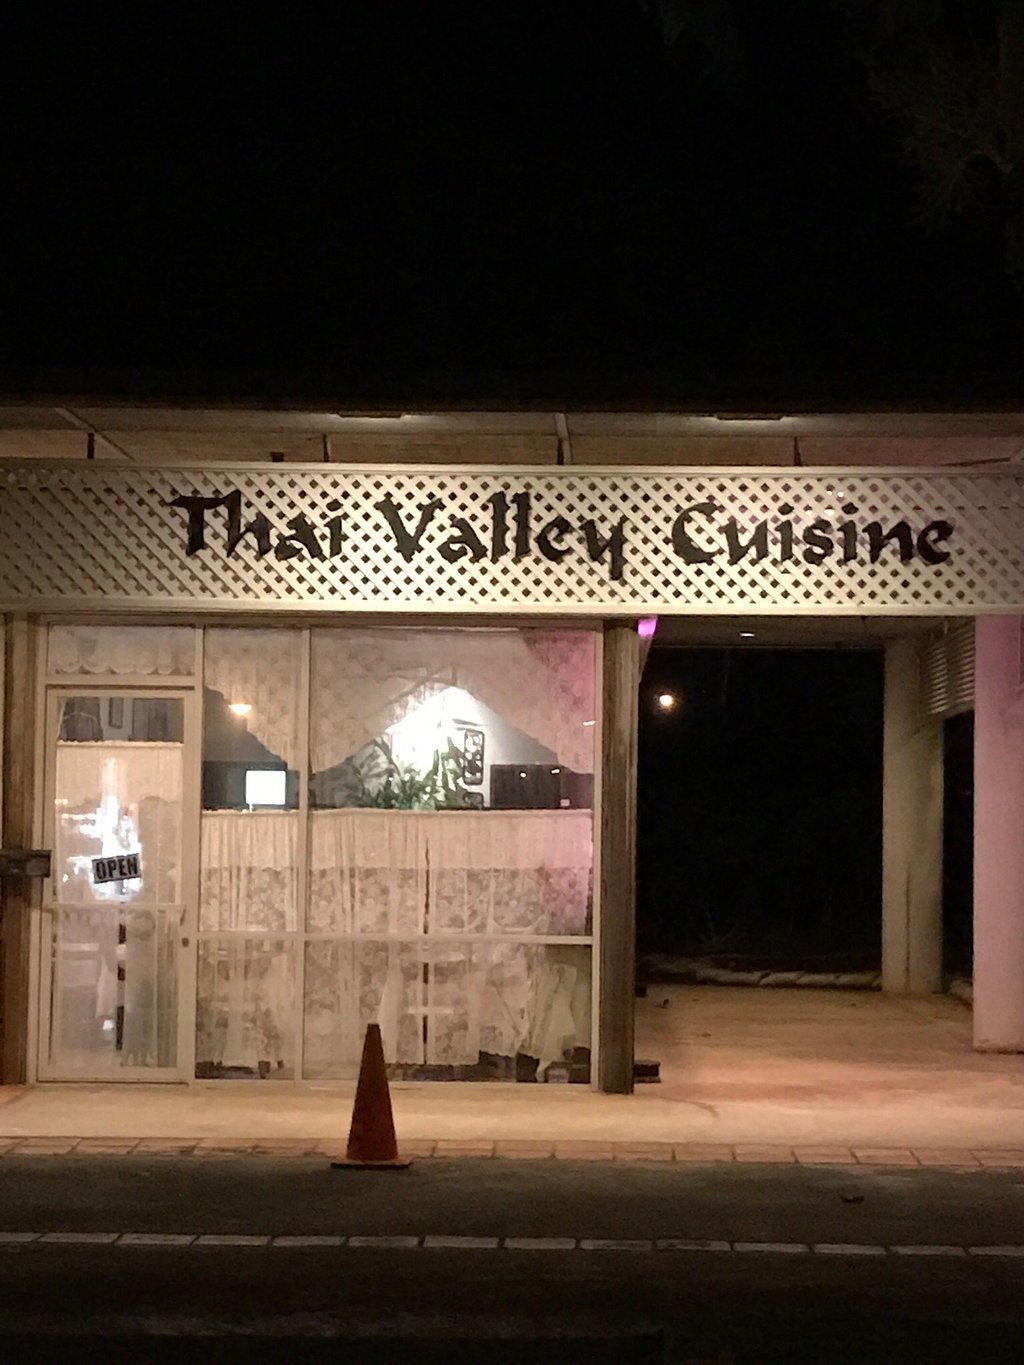 tdai Valley Cuisine